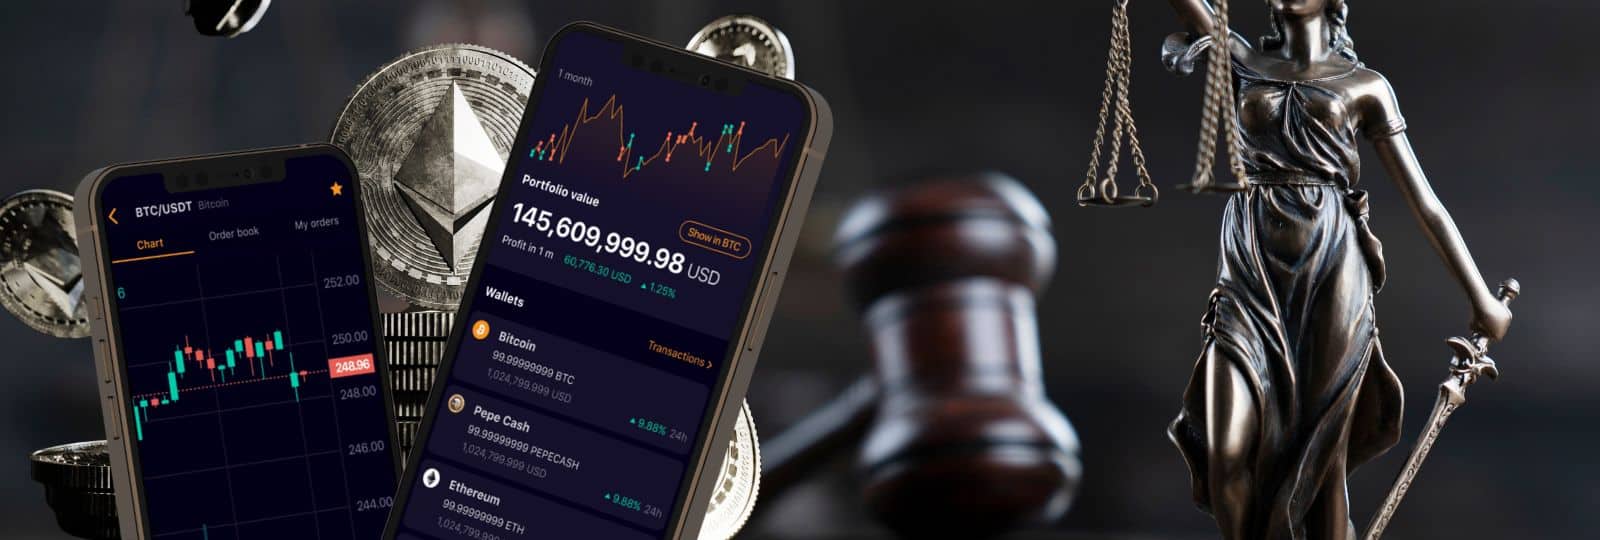 cryptocurrency laws in usa